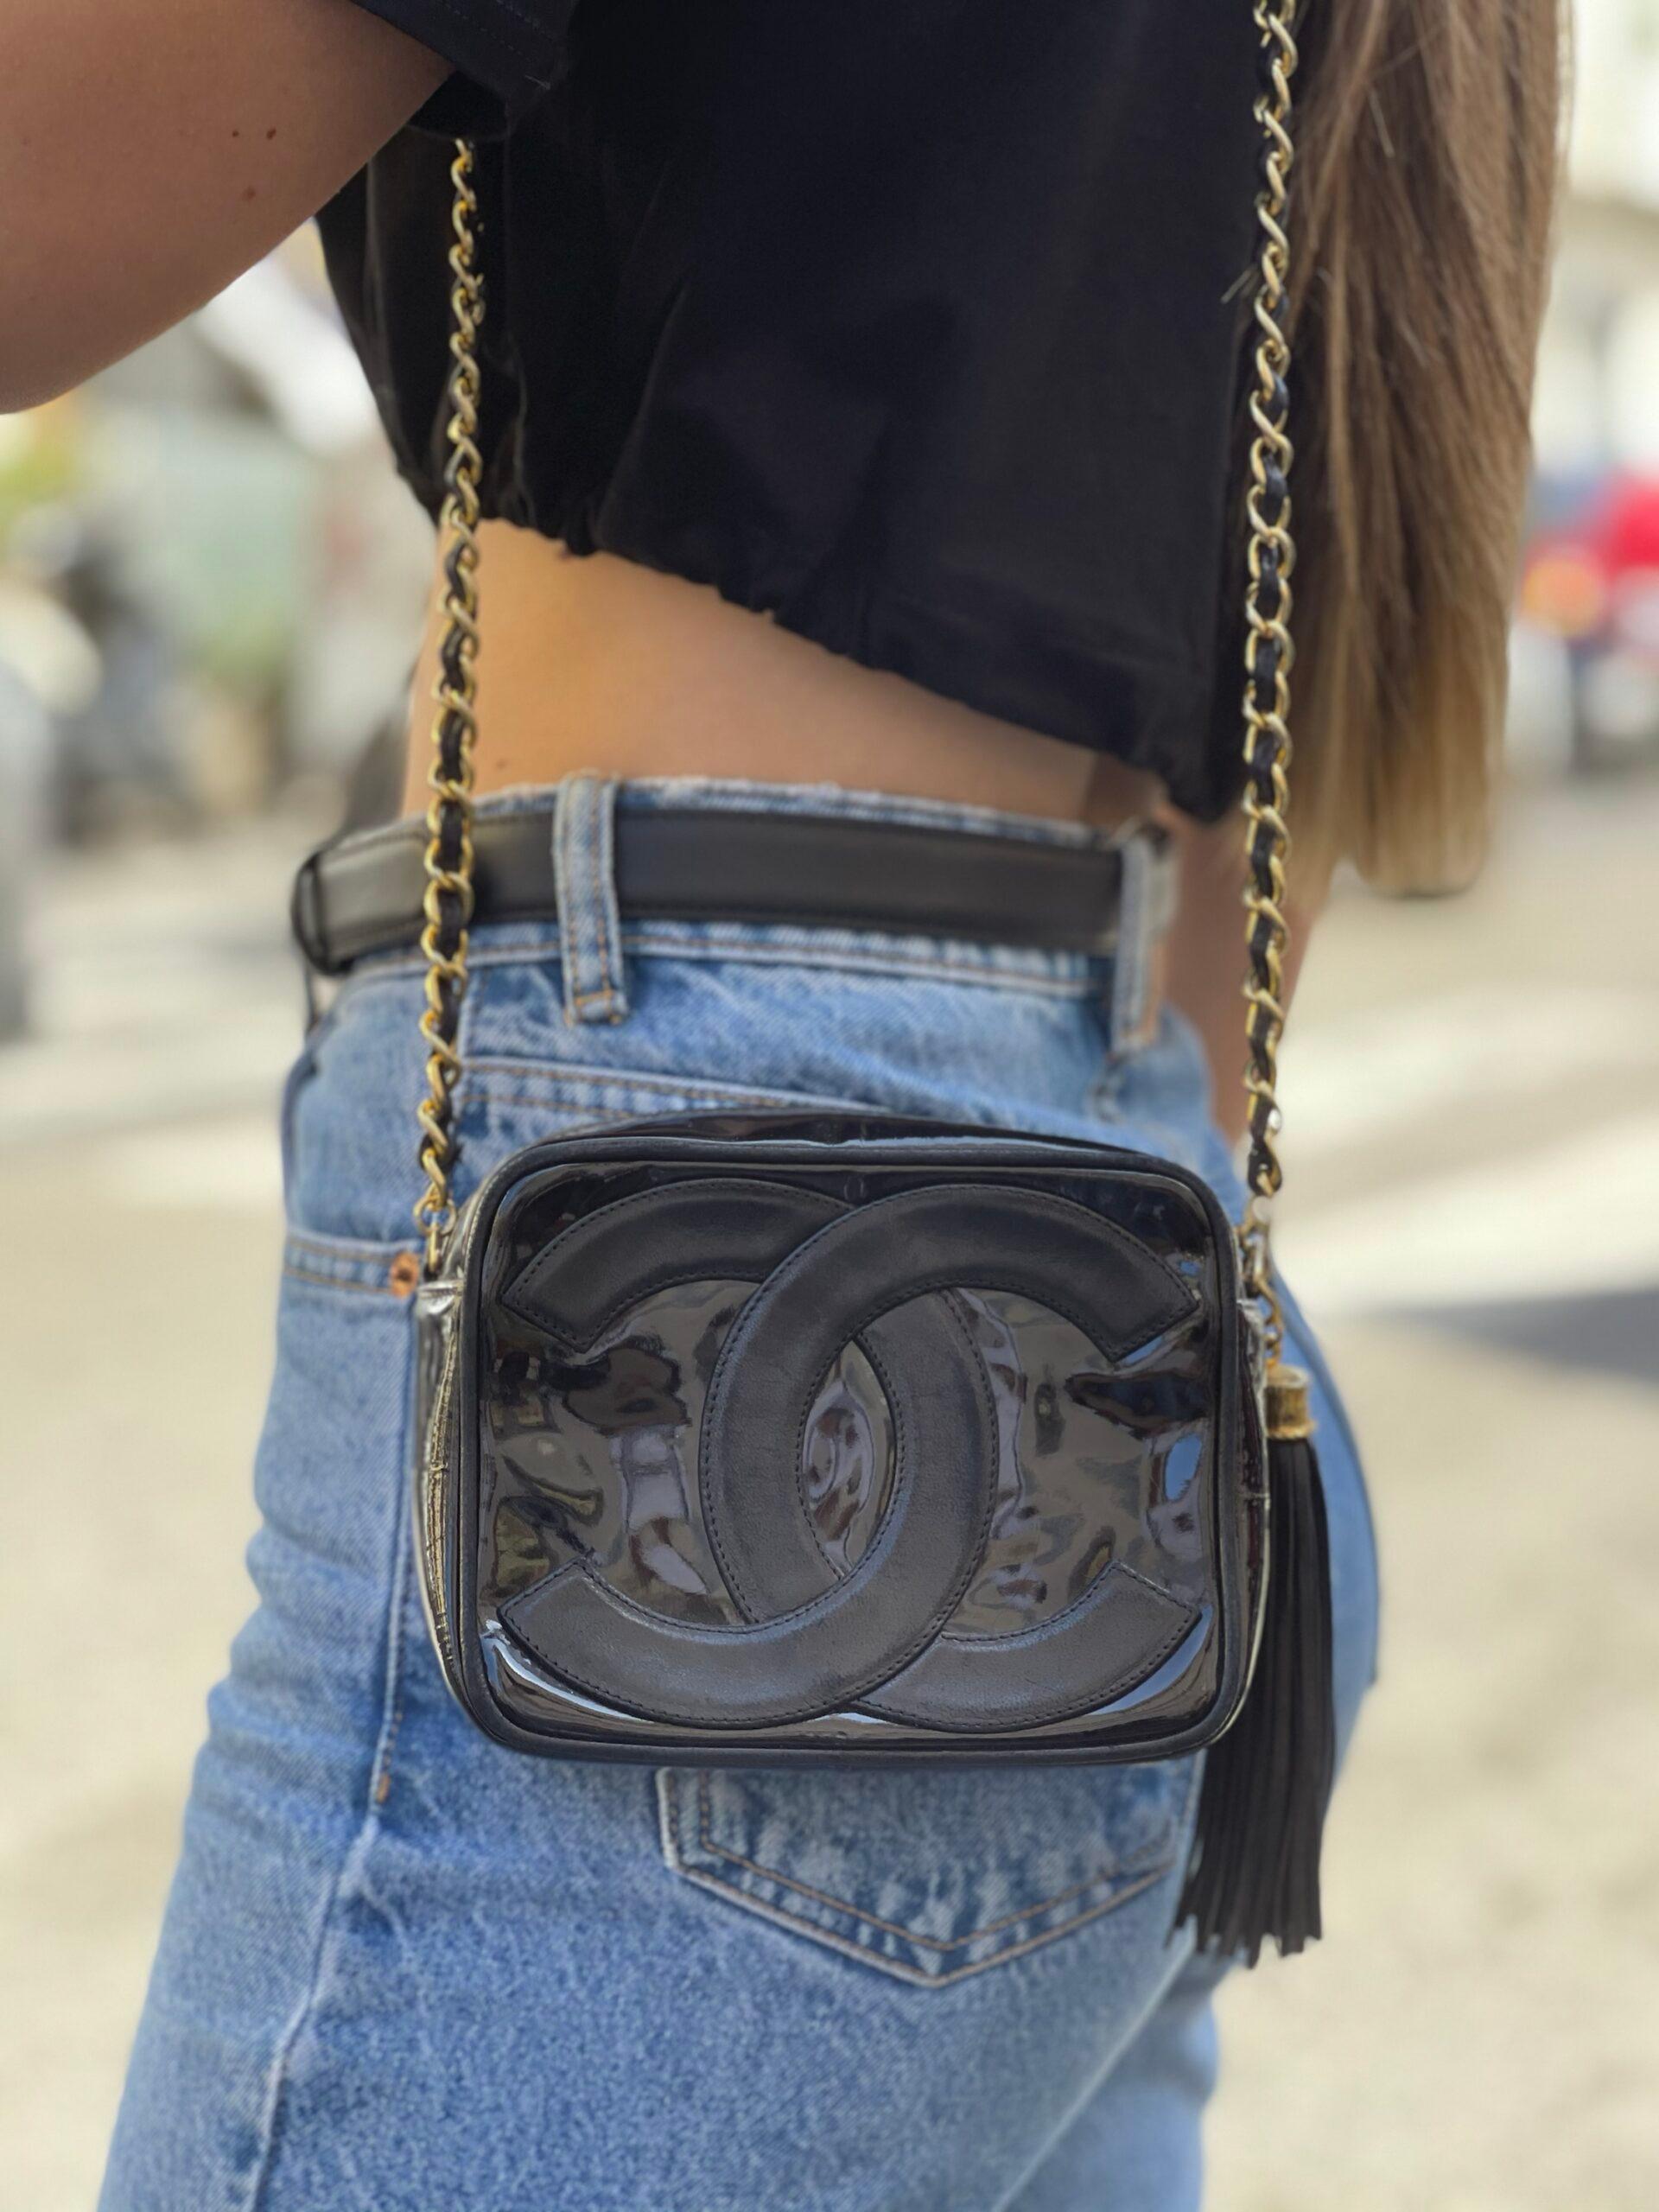 Vintage handbag by Chanel, Camera Bag model, made in black leather with black patent inserts and golden hardware. Equipped with a zip closure, internally lined in leather, roomy for the essentials. Equipped with a leather shoulder strap and braided